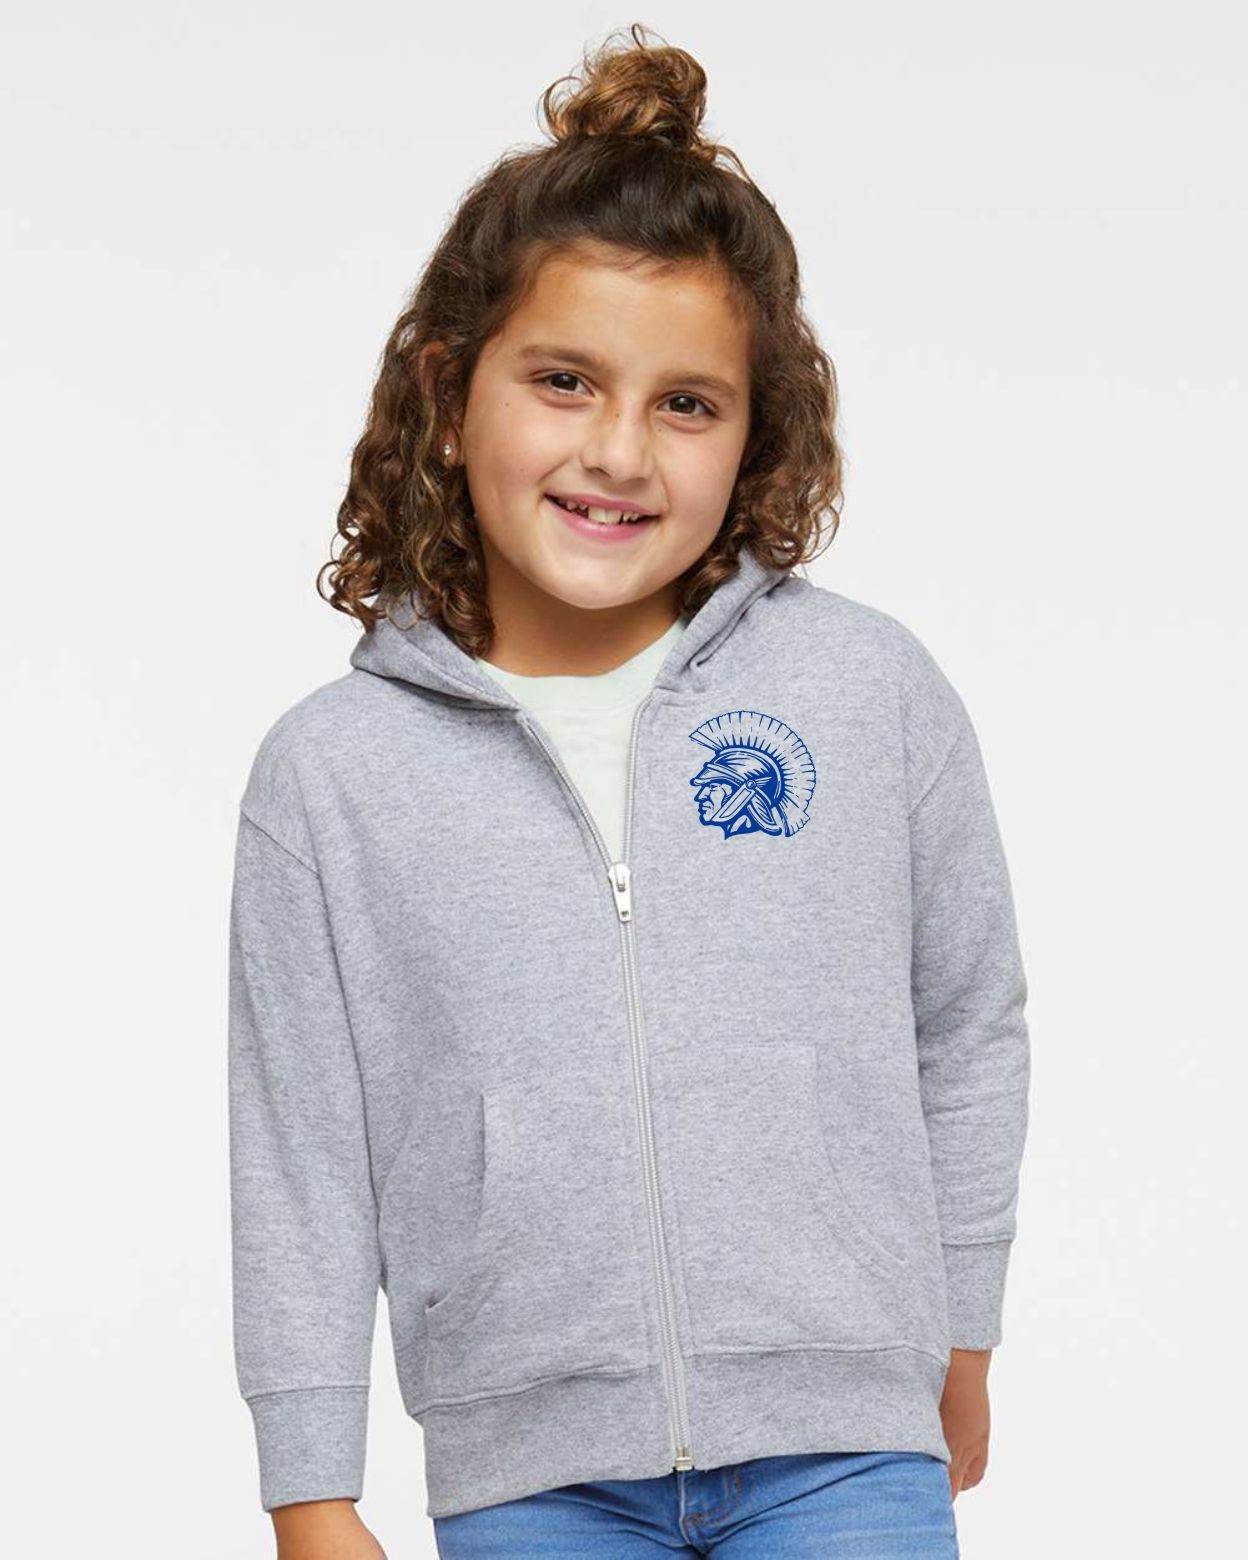 Toddler West Central Full Zip Hoodie - Heather